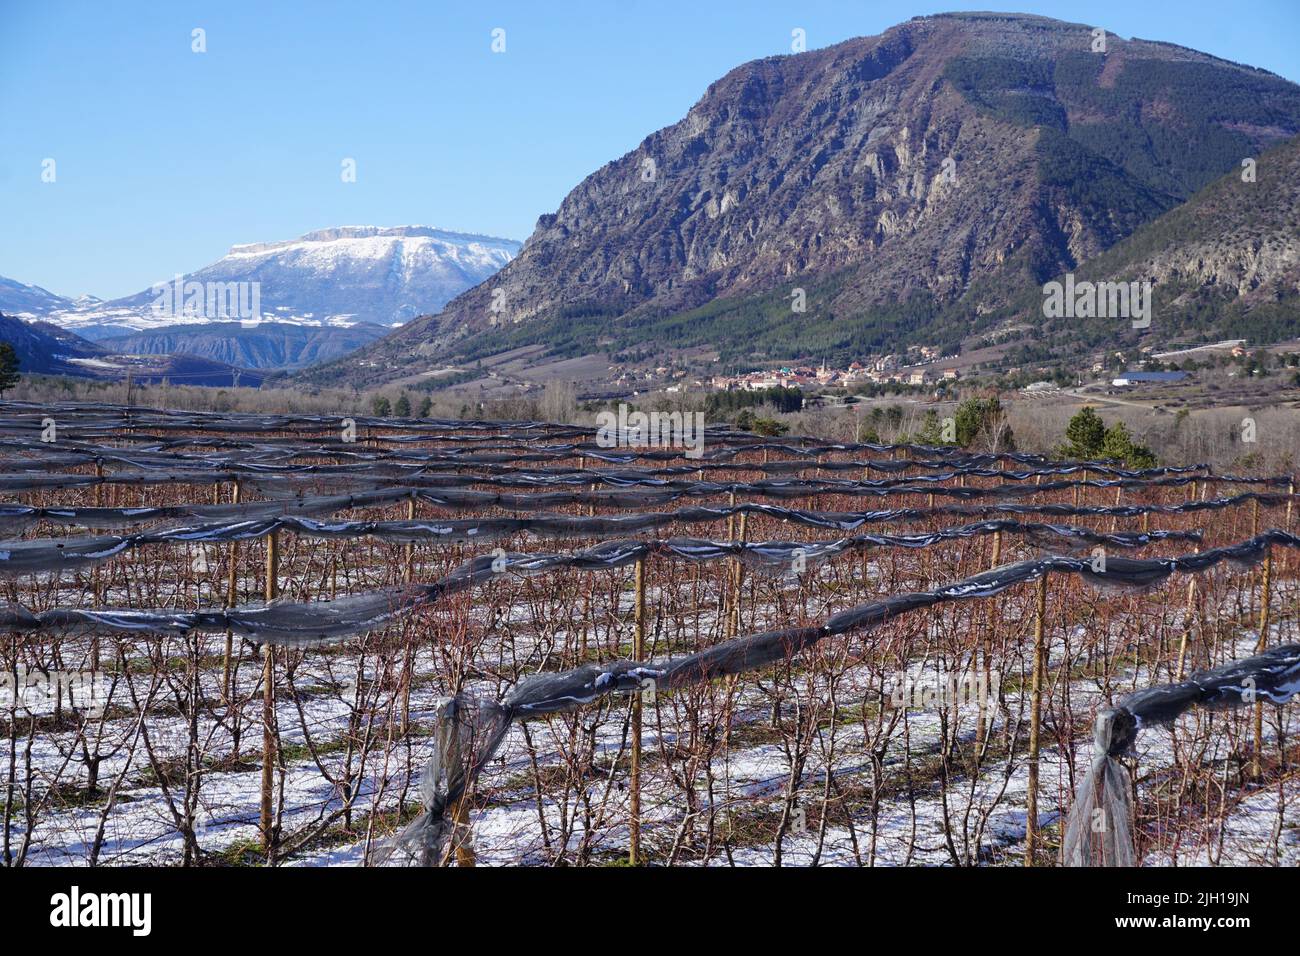 rows of fruits trees in the orchards of the southern alps france Stock Photo